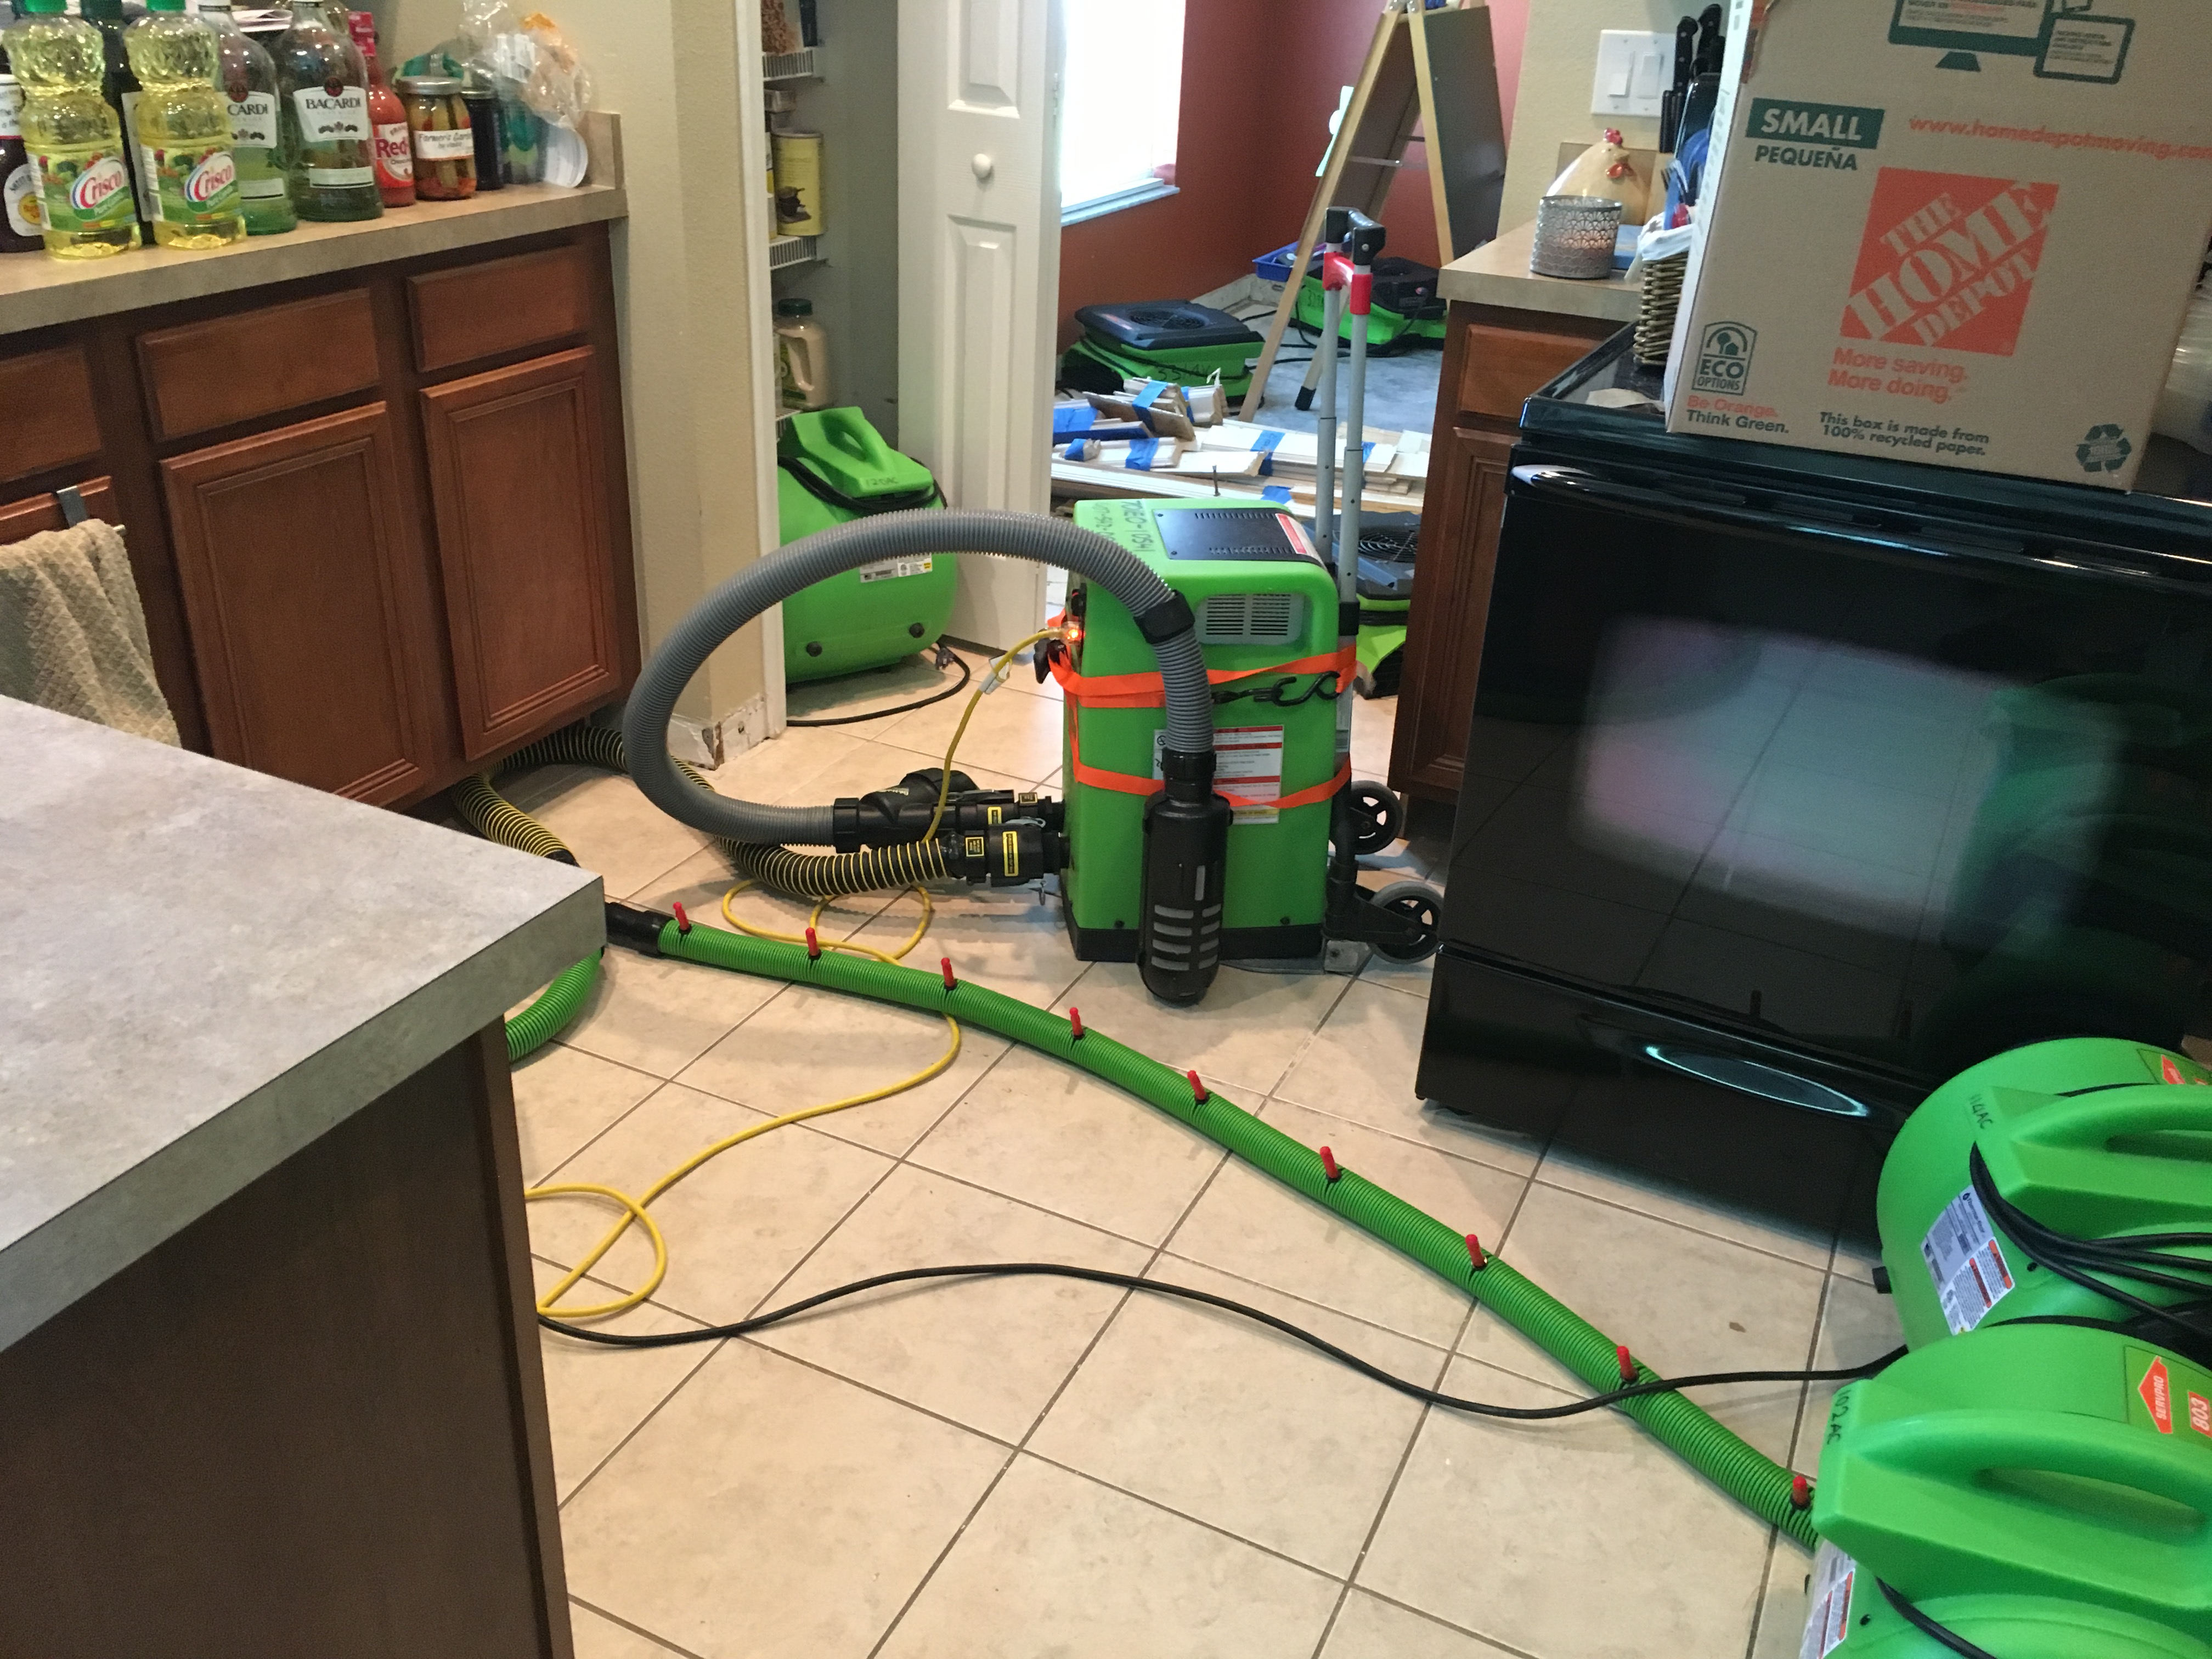 Got the SERVPRO equipment up and running during a residential water restoration.